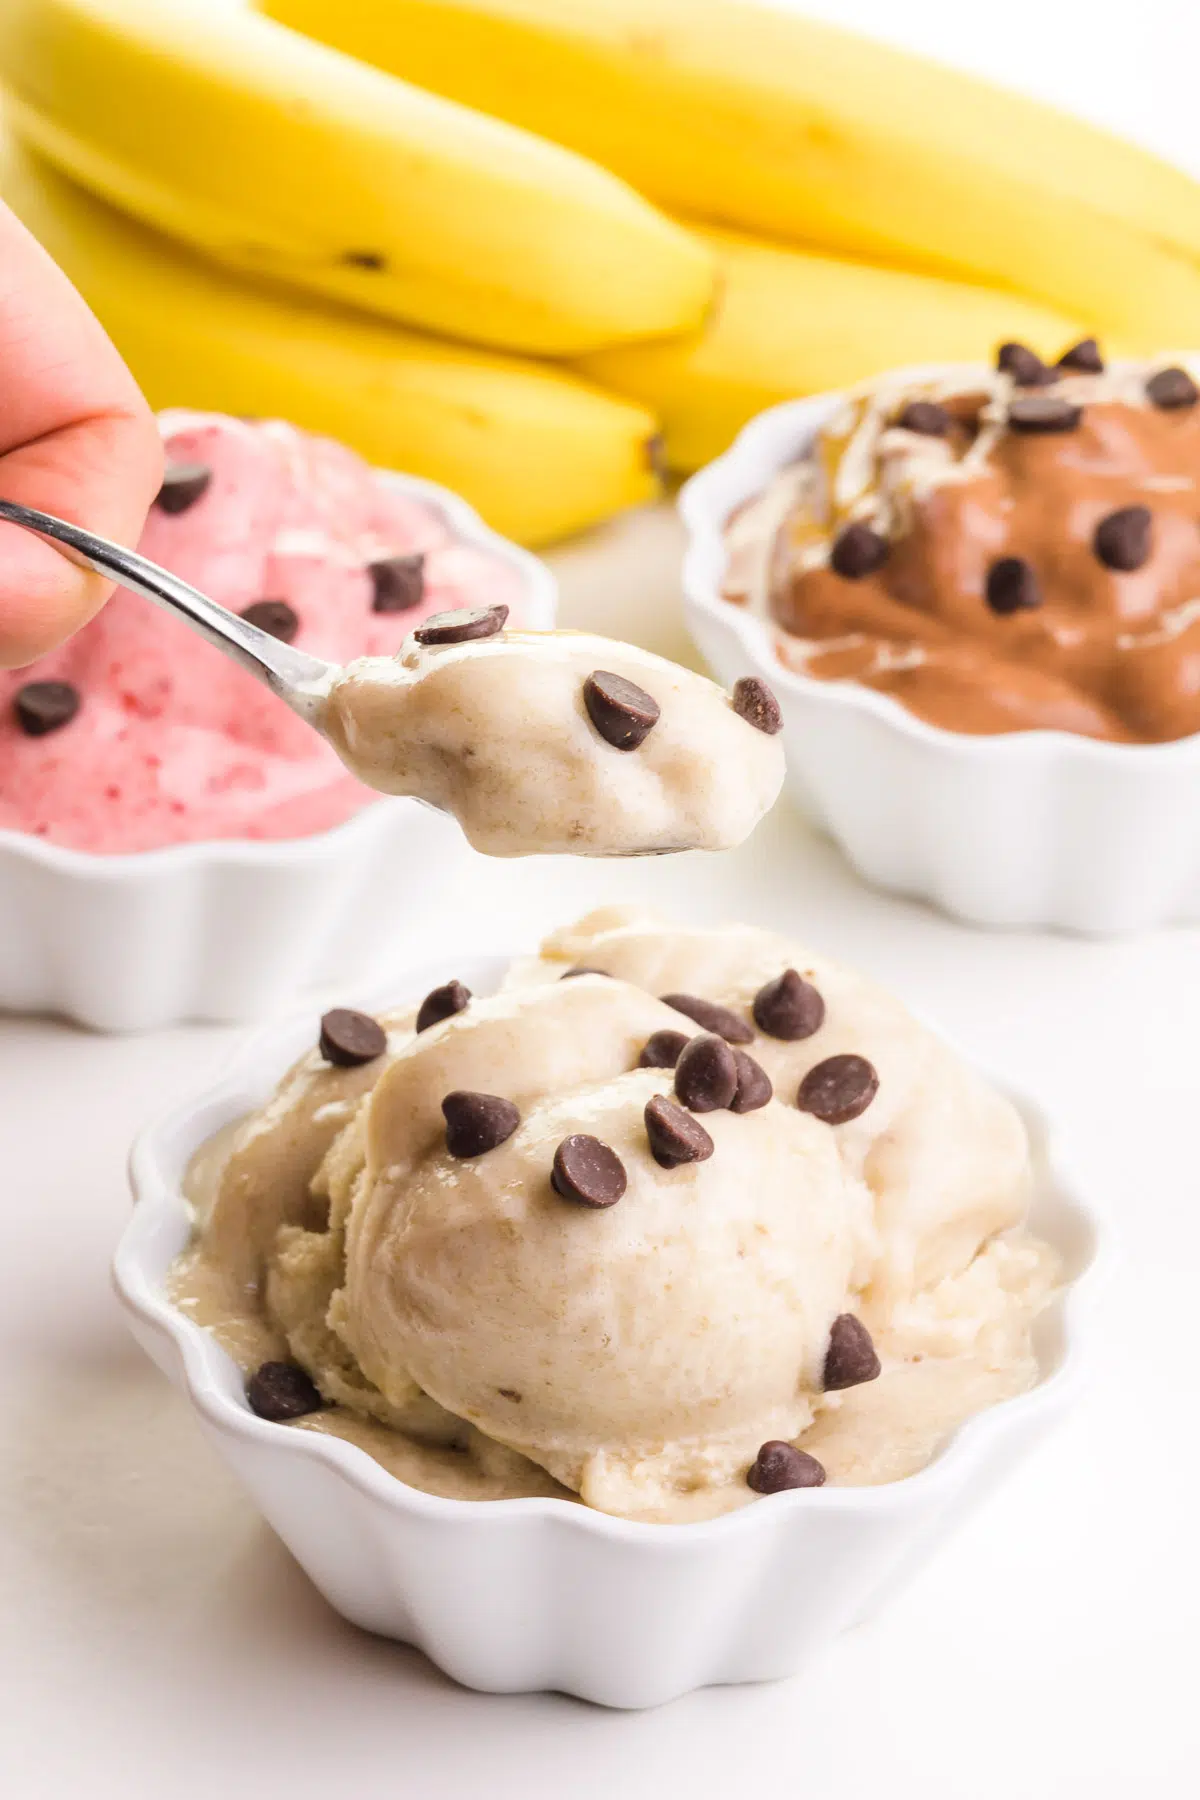 A hand holds a spoonful of banana ice cream hovering over a bowl of it. There are different flavors of ice cream and bananas in the background.